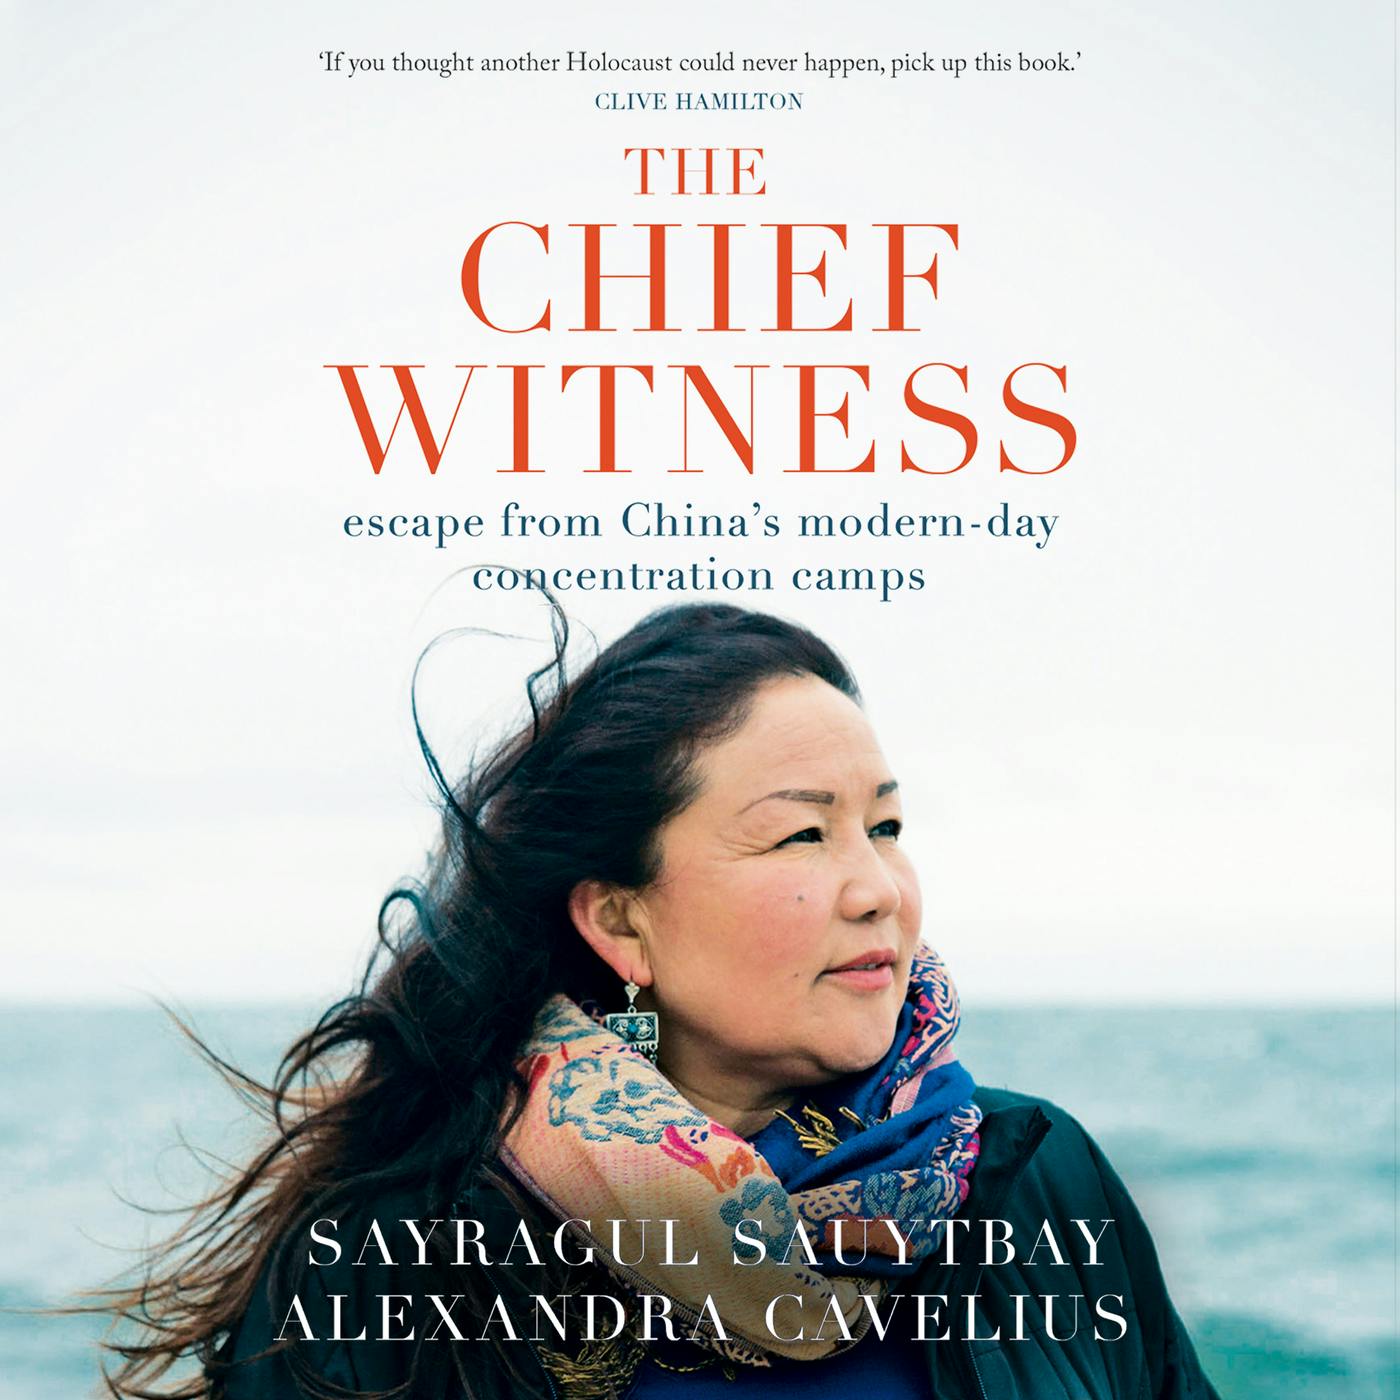 The Chief Witness - Escape from China's Modern-Day Concentration Camps (Unabridged) - Alexandra Cavelius, Sayragul Sauytbay